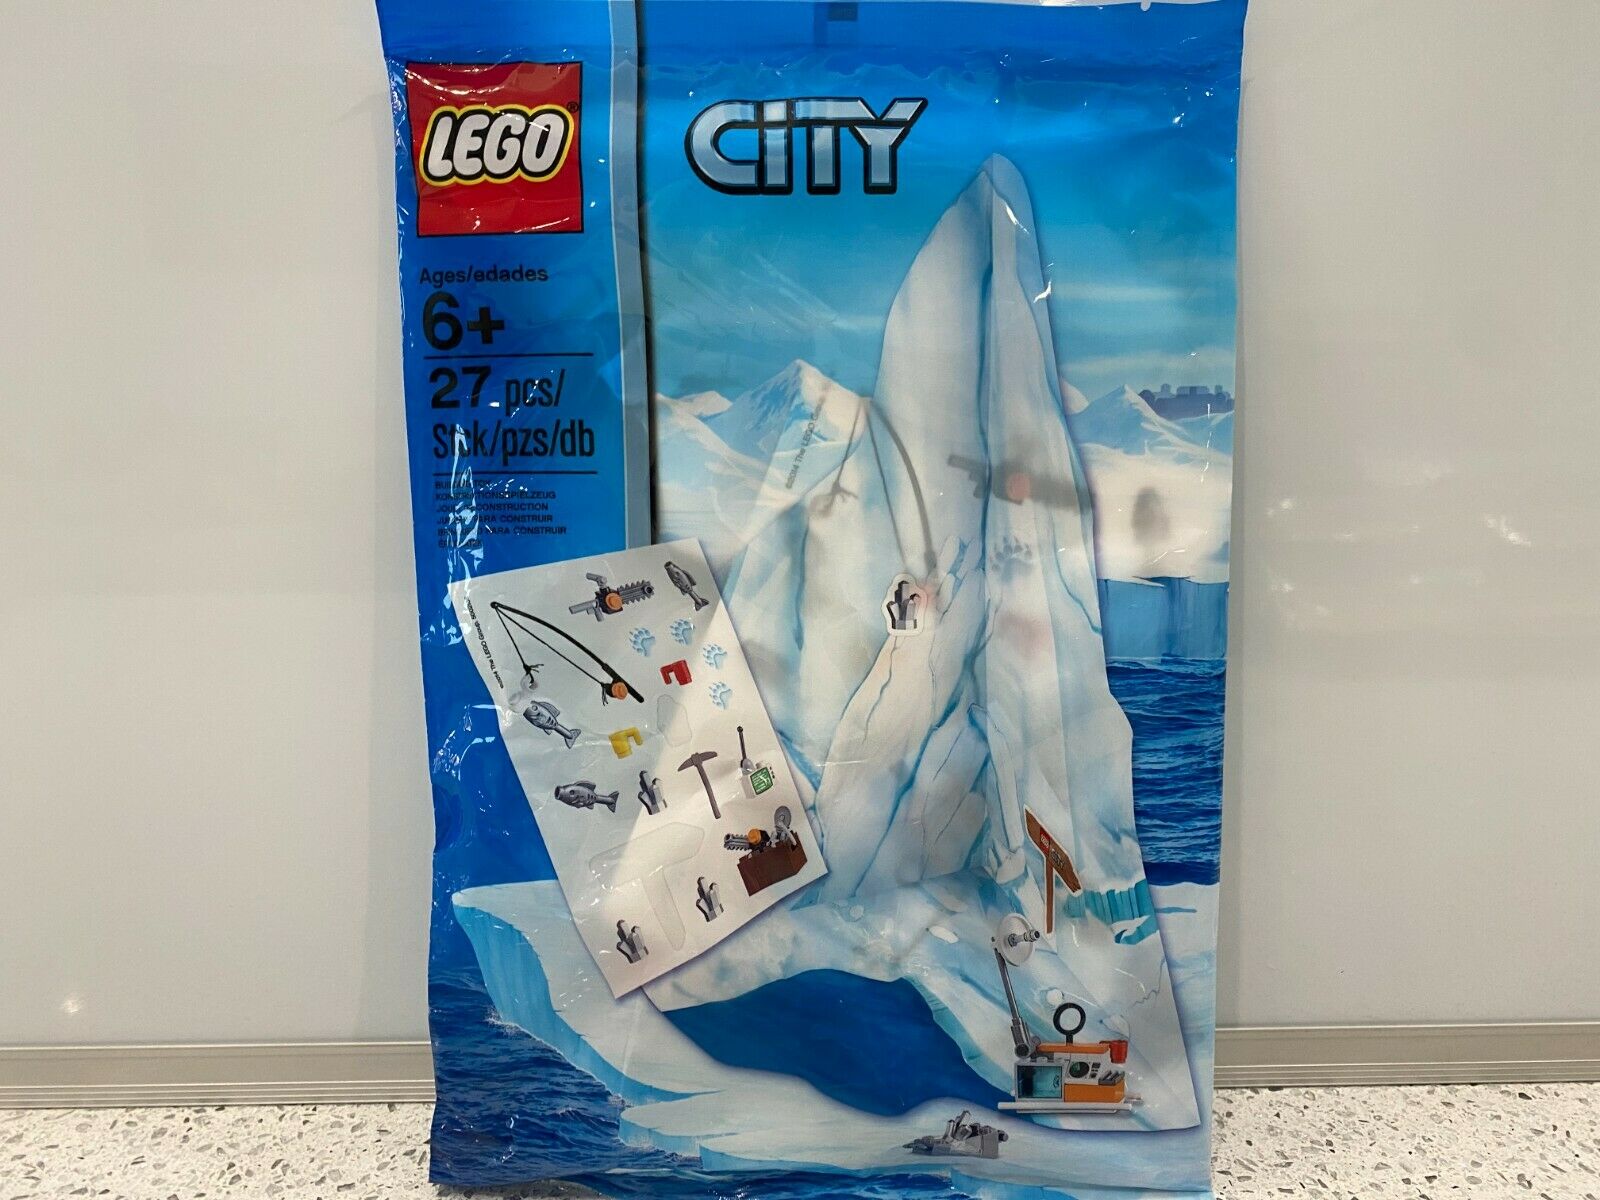 Lego City Iceberg 5002136 Arctic Accessory Set - New In Sealed Packaging!